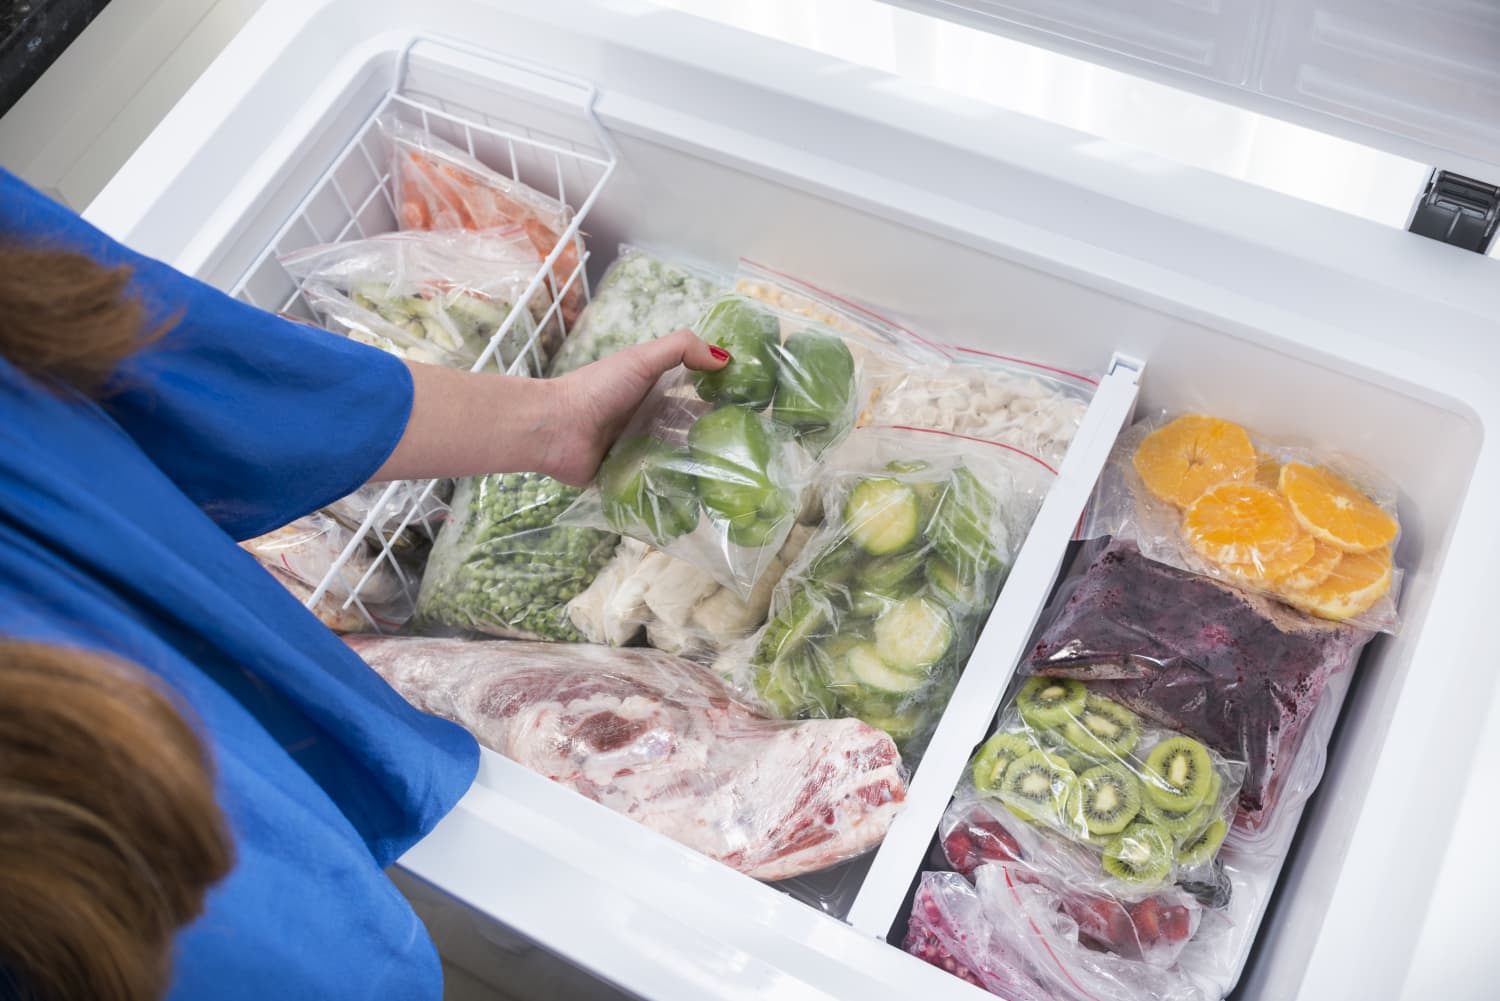 5 Tips to Organize Your Chest Freezer